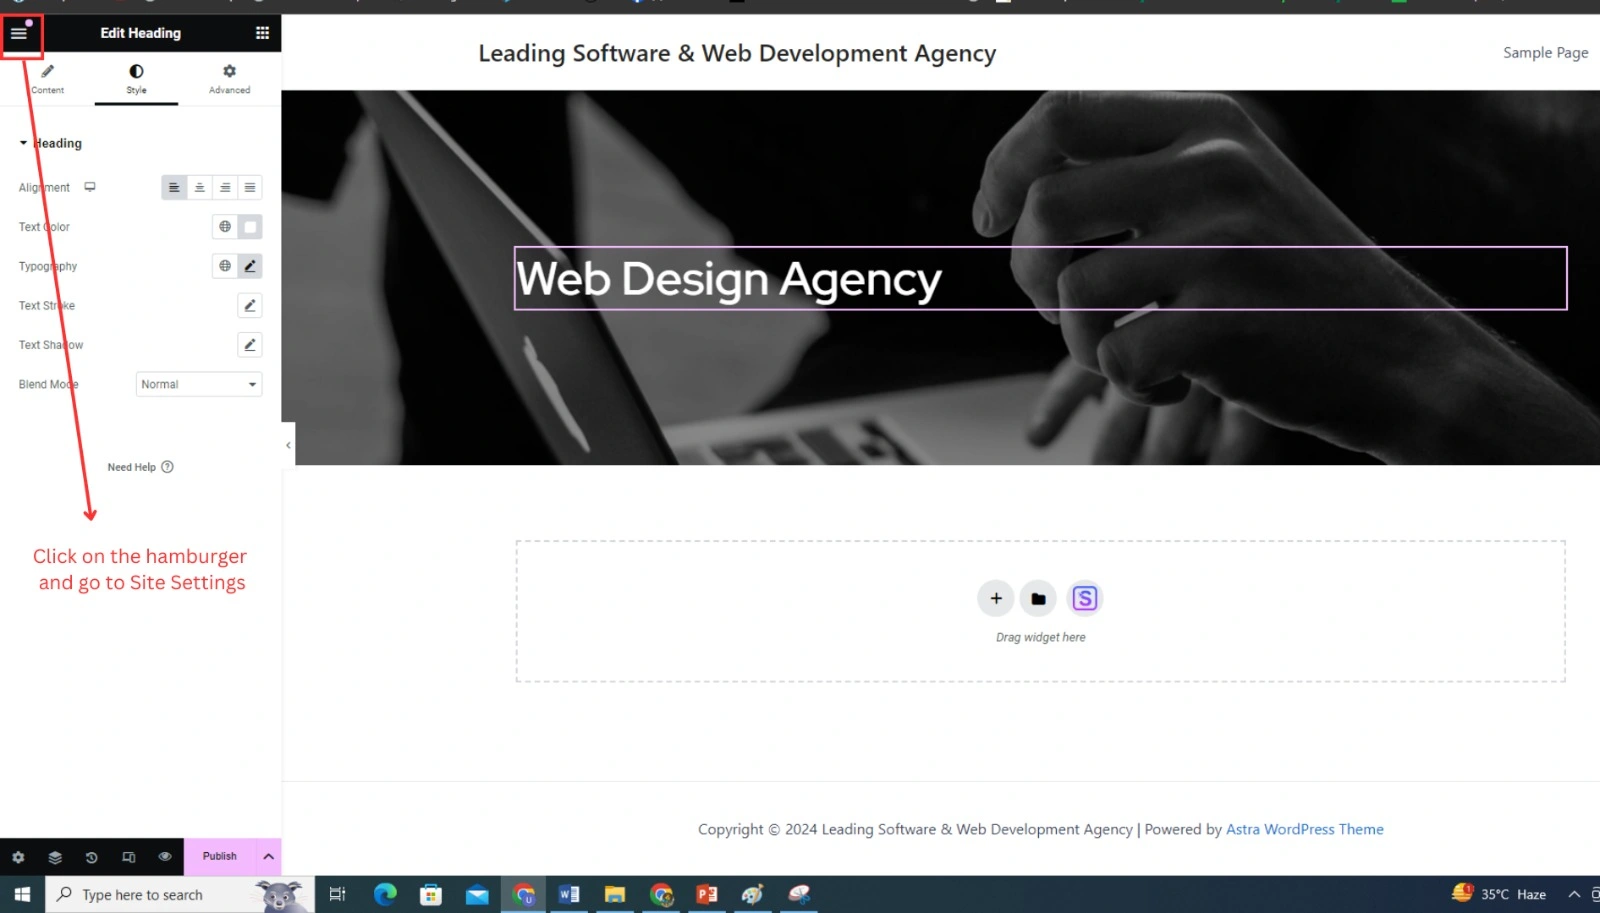 Web design agency's website showcasing their creative and professional services.